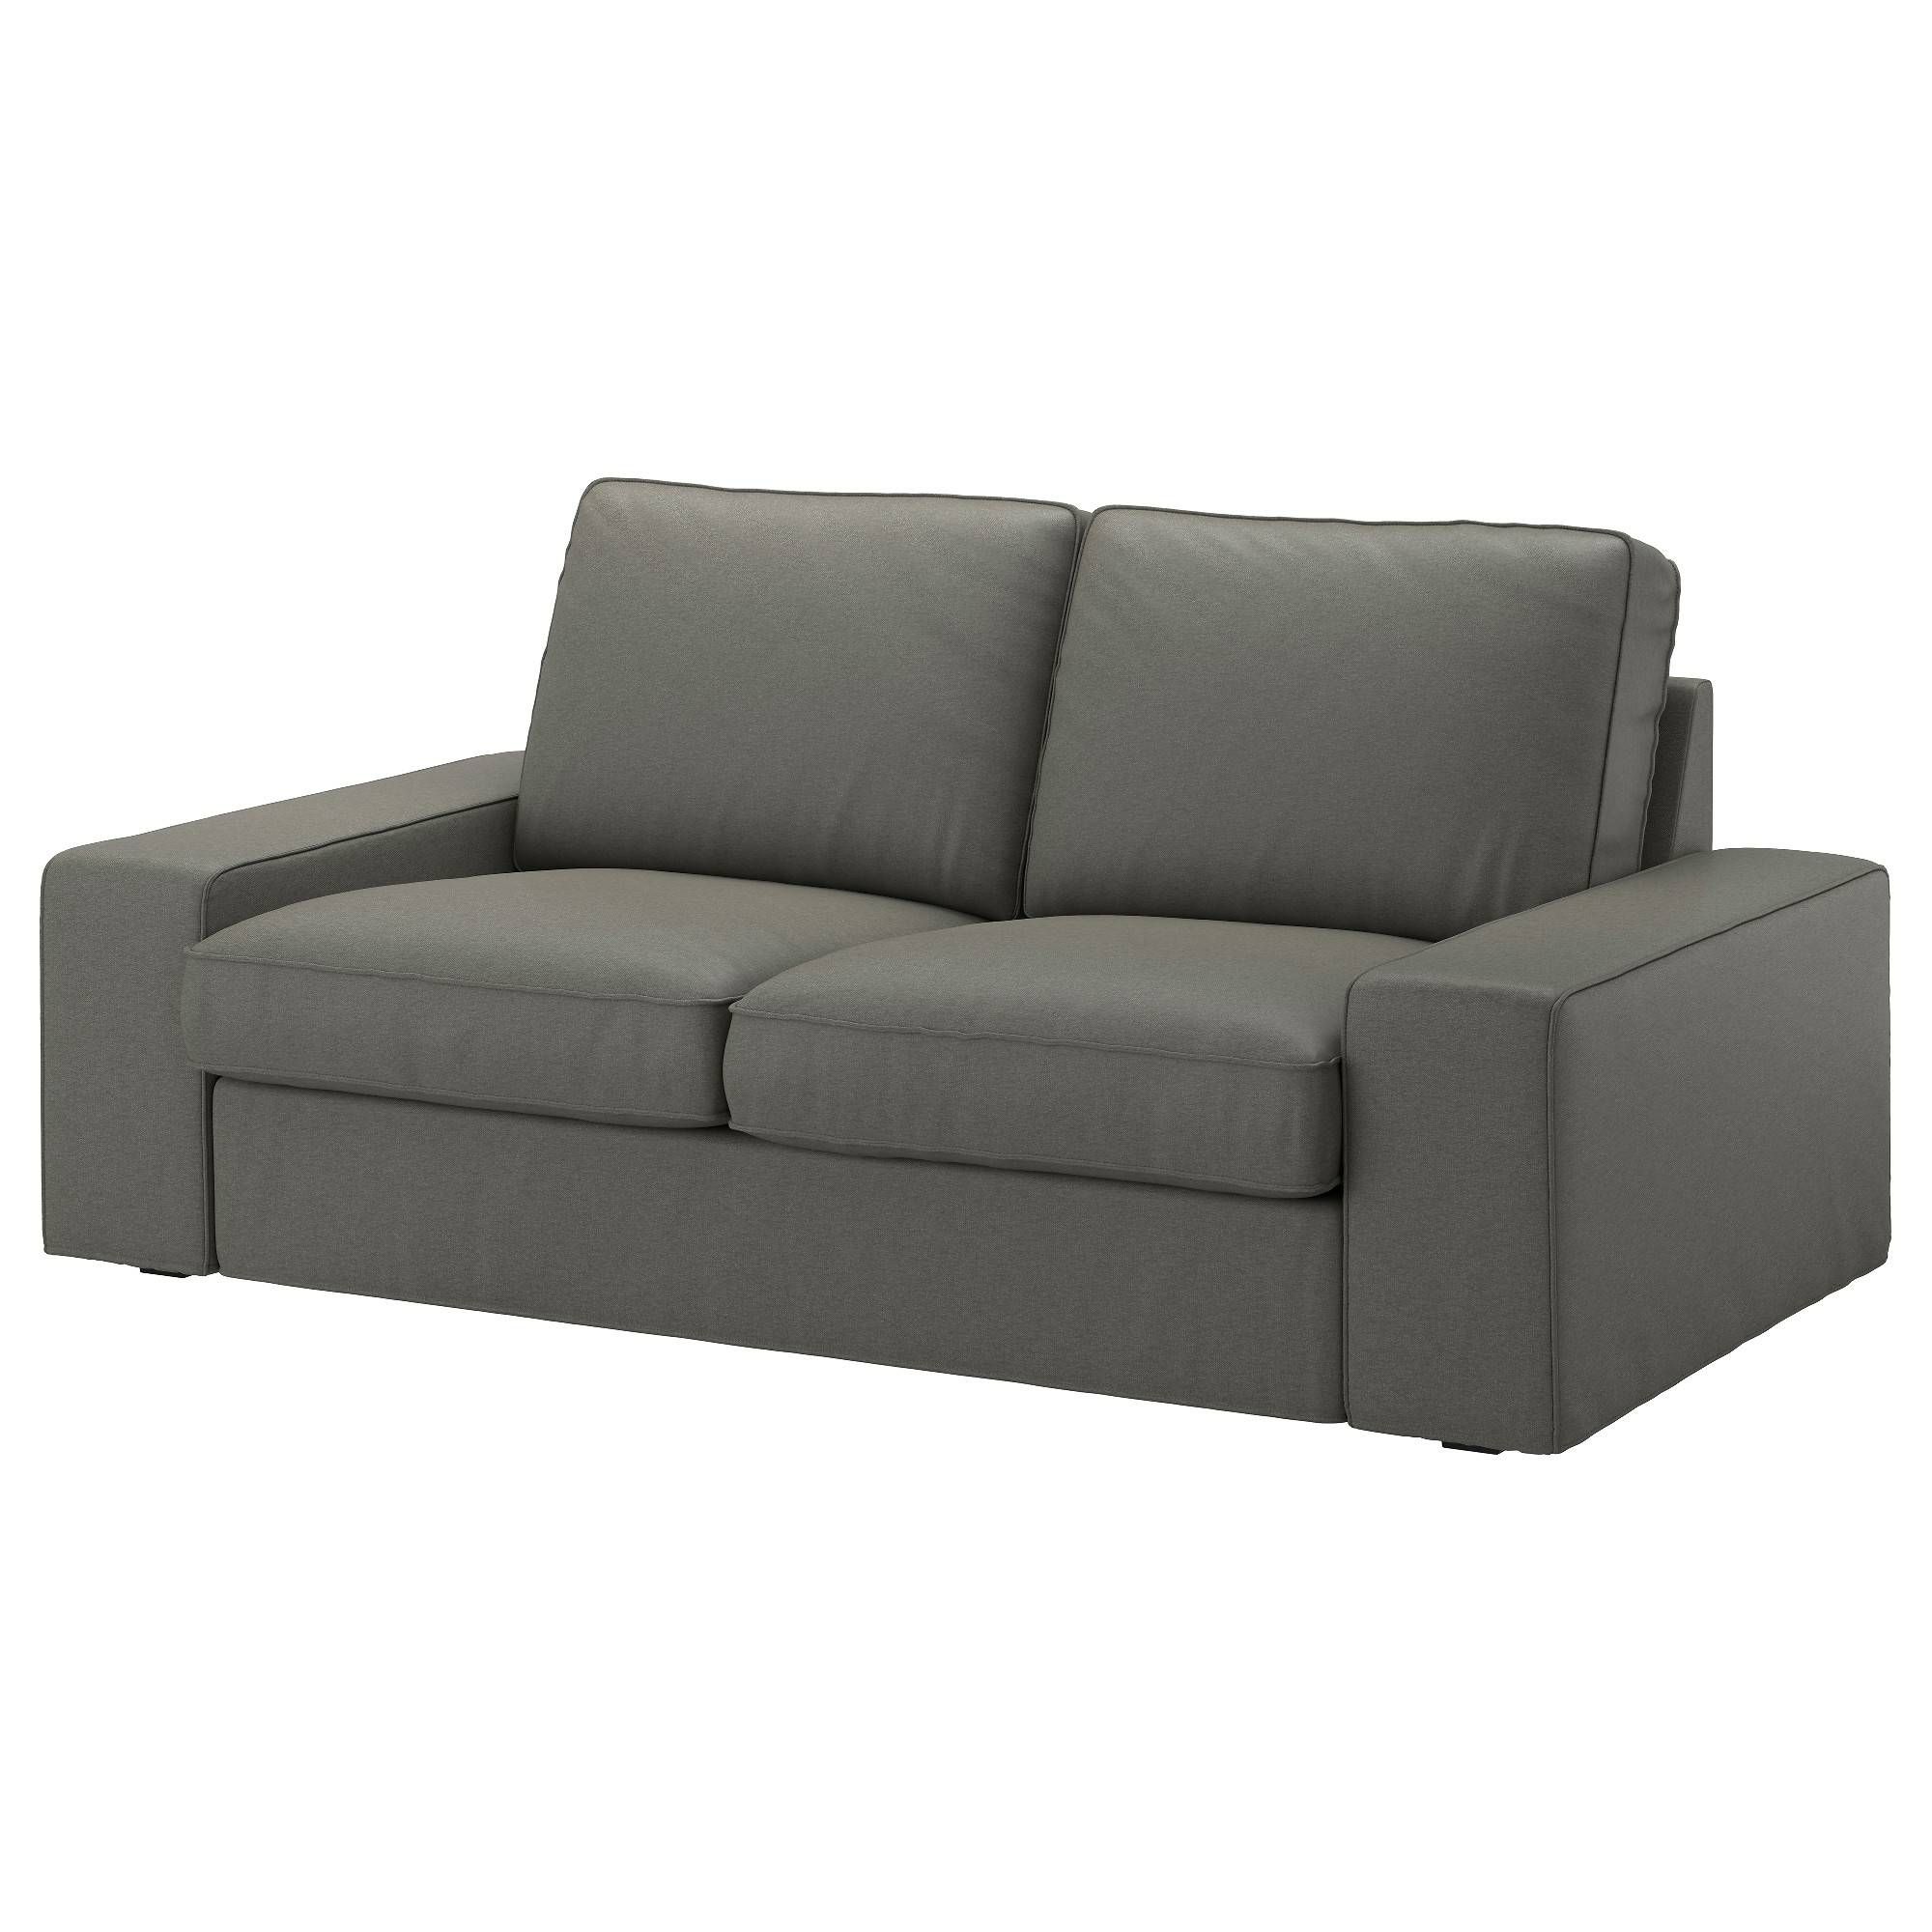 Sofas & Armchairs | Ikea With Sofa Chairs Ikea (View 10 of 30)